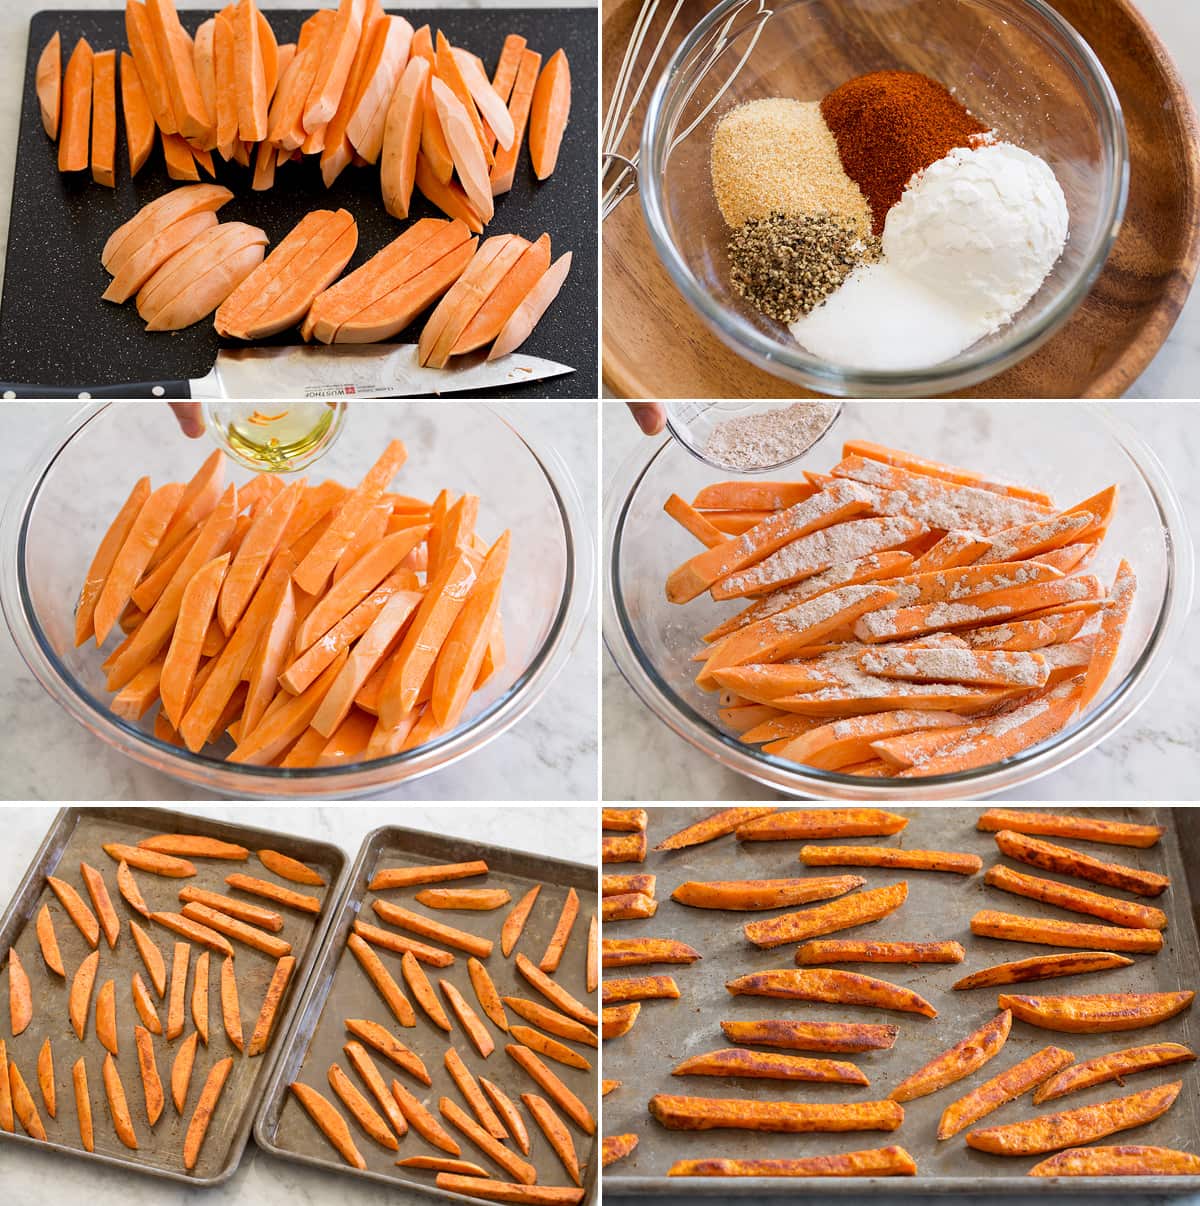 Collage of six images showing steps of cutting and preparing sweet potato fries.